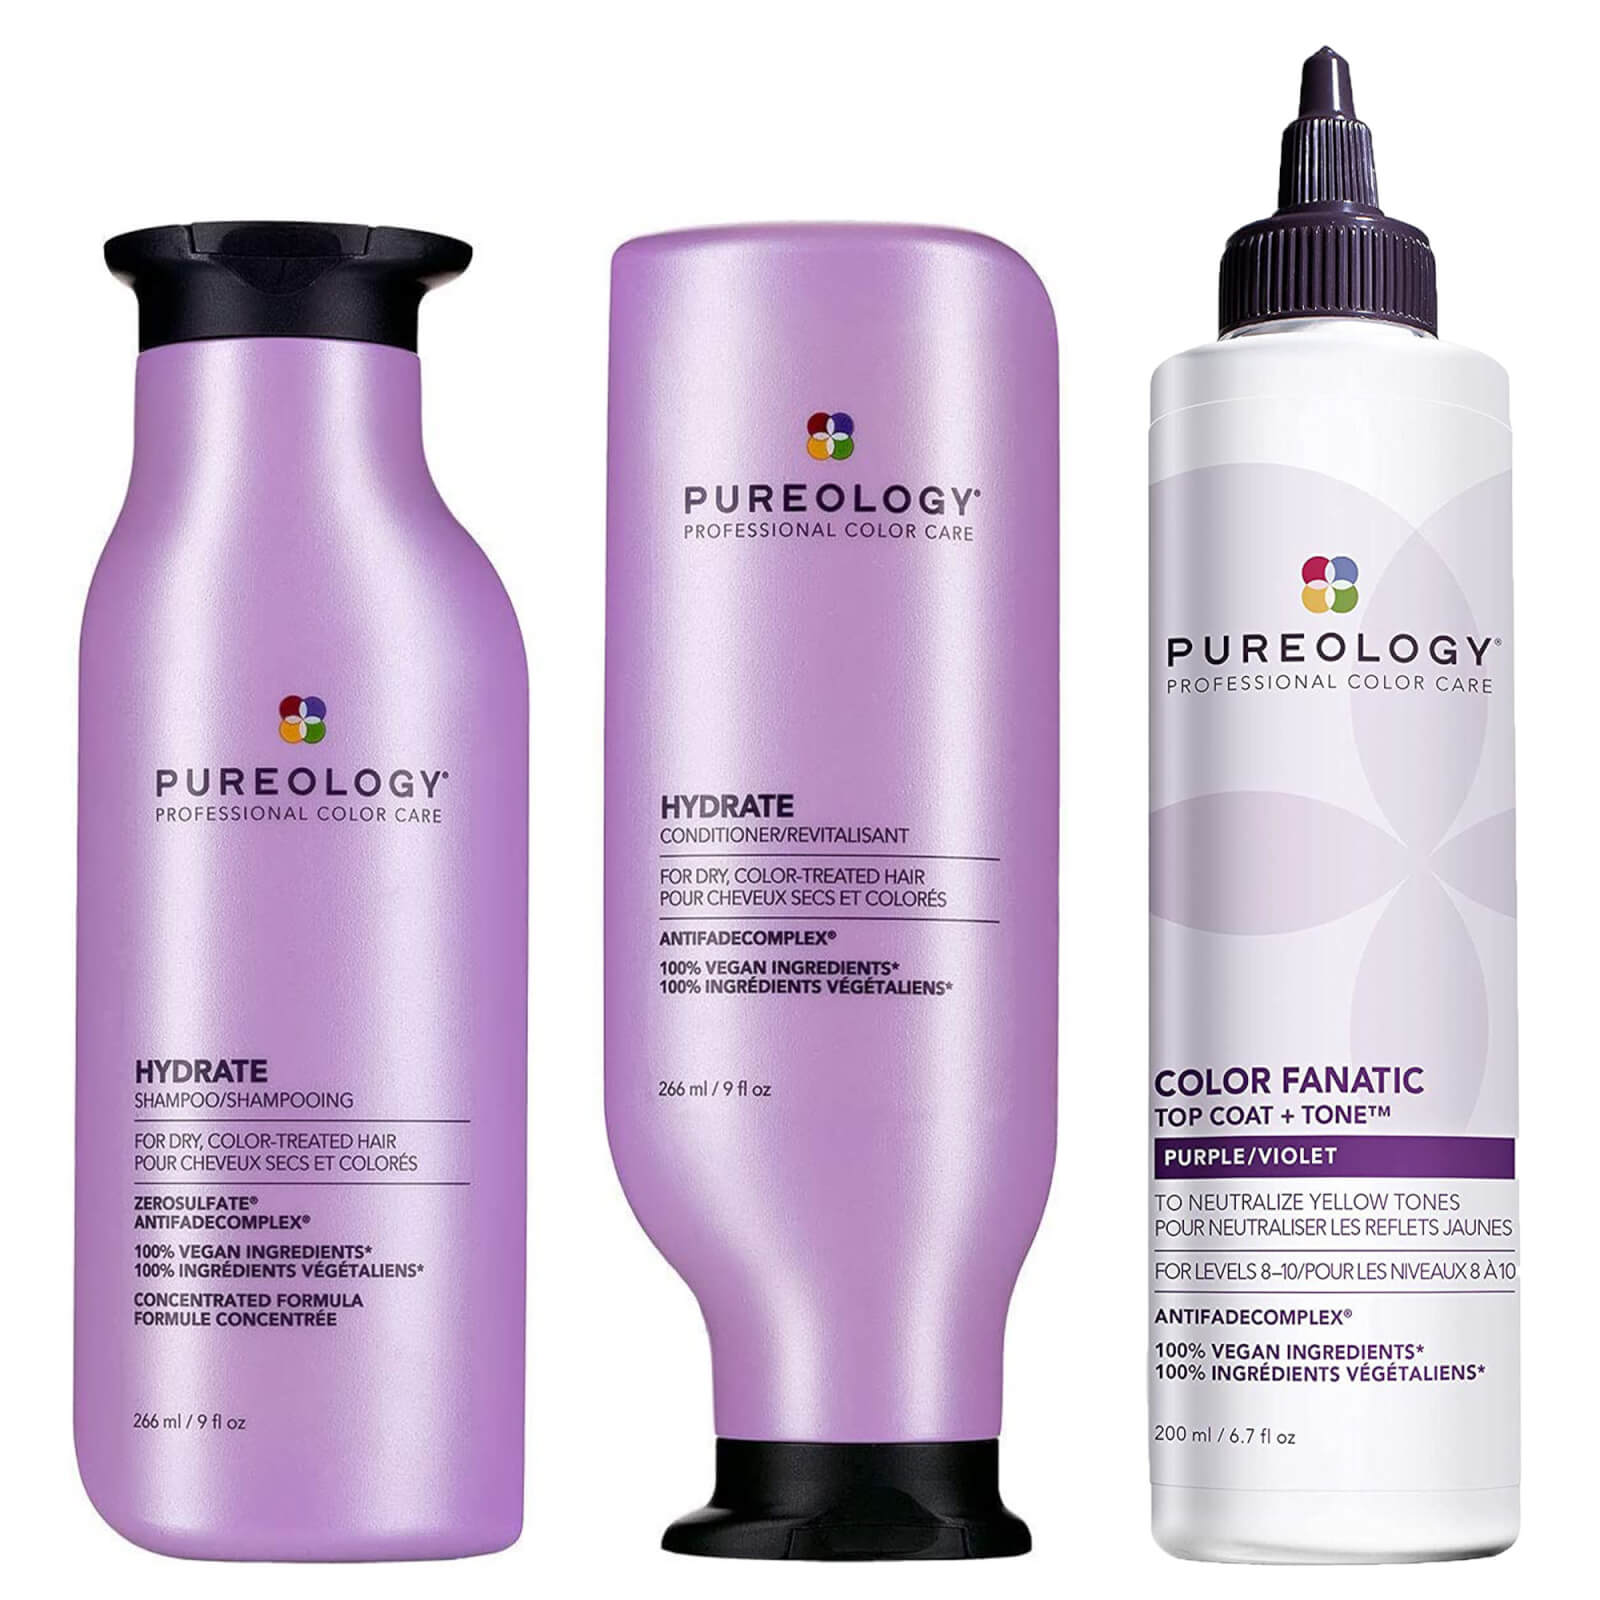 Pureology Hydrate Shampoo, Conditioner and Color Fanatic Purple Toner Routine for Neutralising and H